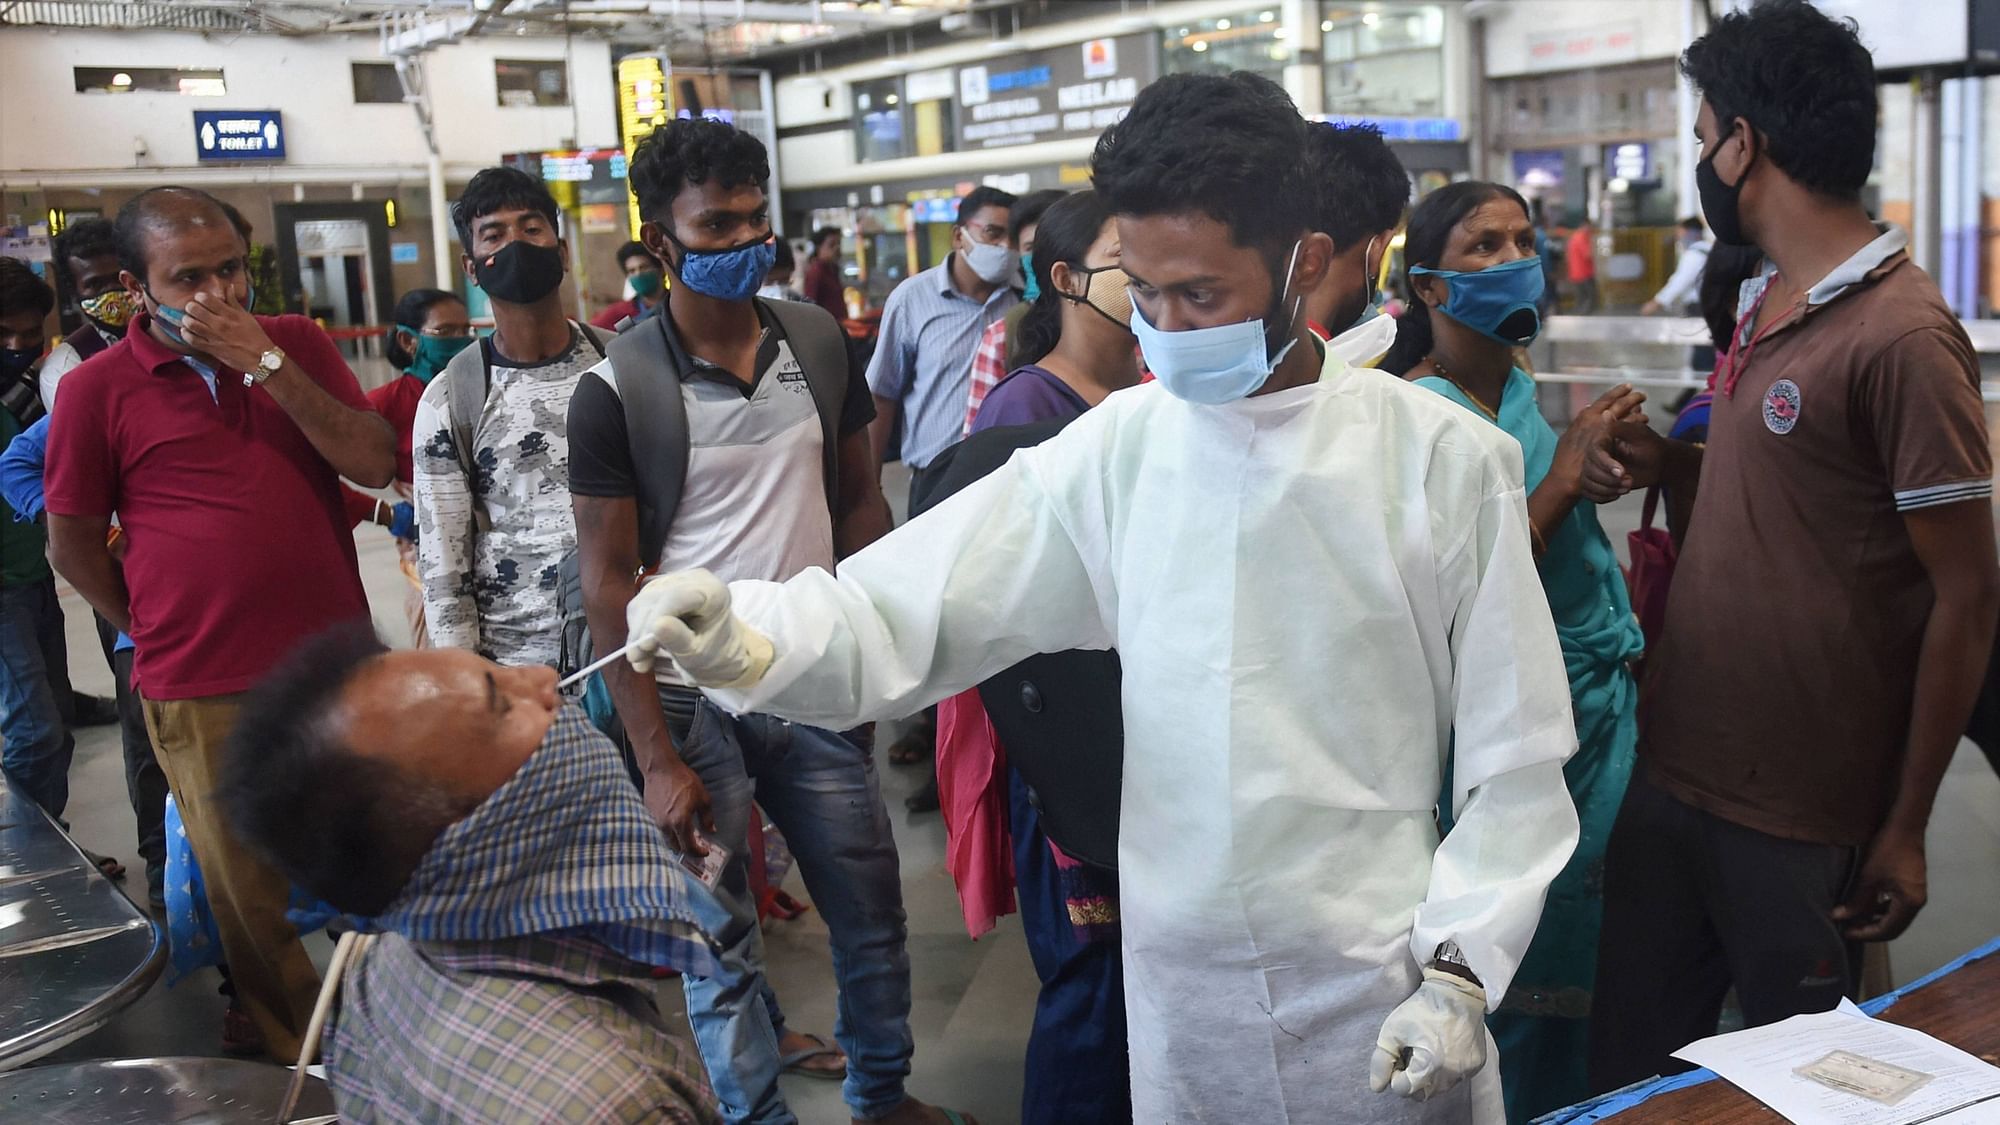 A health worker collects nasal sample from a passenger for COVID-19 test, at the Chhatrapati Shivaji Maharaj terminus in Mumbai. (Image for representative purpose only)